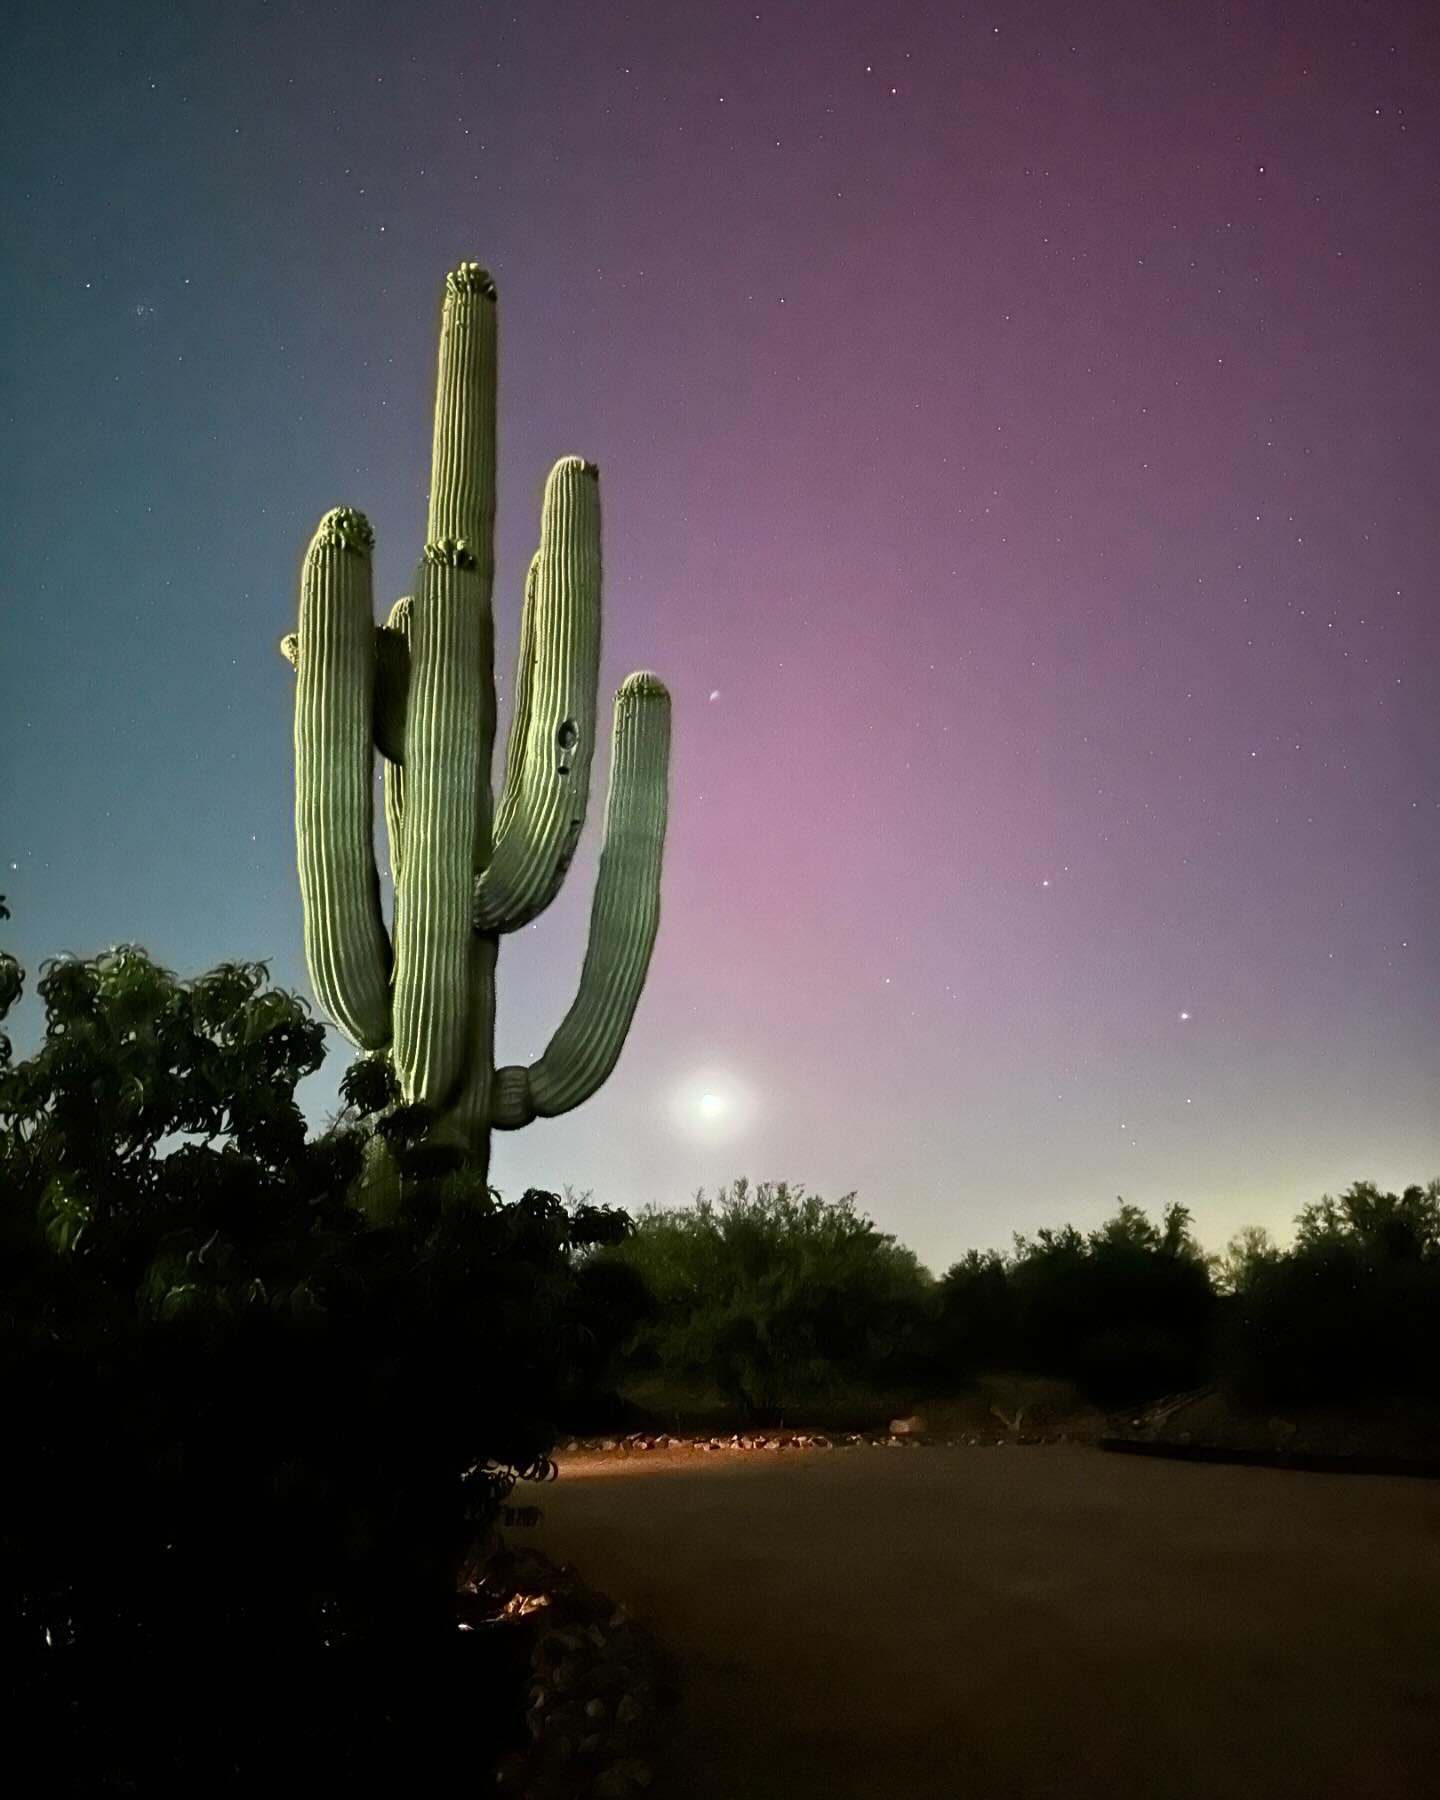 That time we saw the #auroraborealis all the way down in Tucson, AZ. 🌵✨ The camera saw it much more clearly than the eye, but I&rsquo;m in awe. Glad we stayed up late to capture this! 

First image around 9:30pm. Next two images around 11:30pm. 

Di